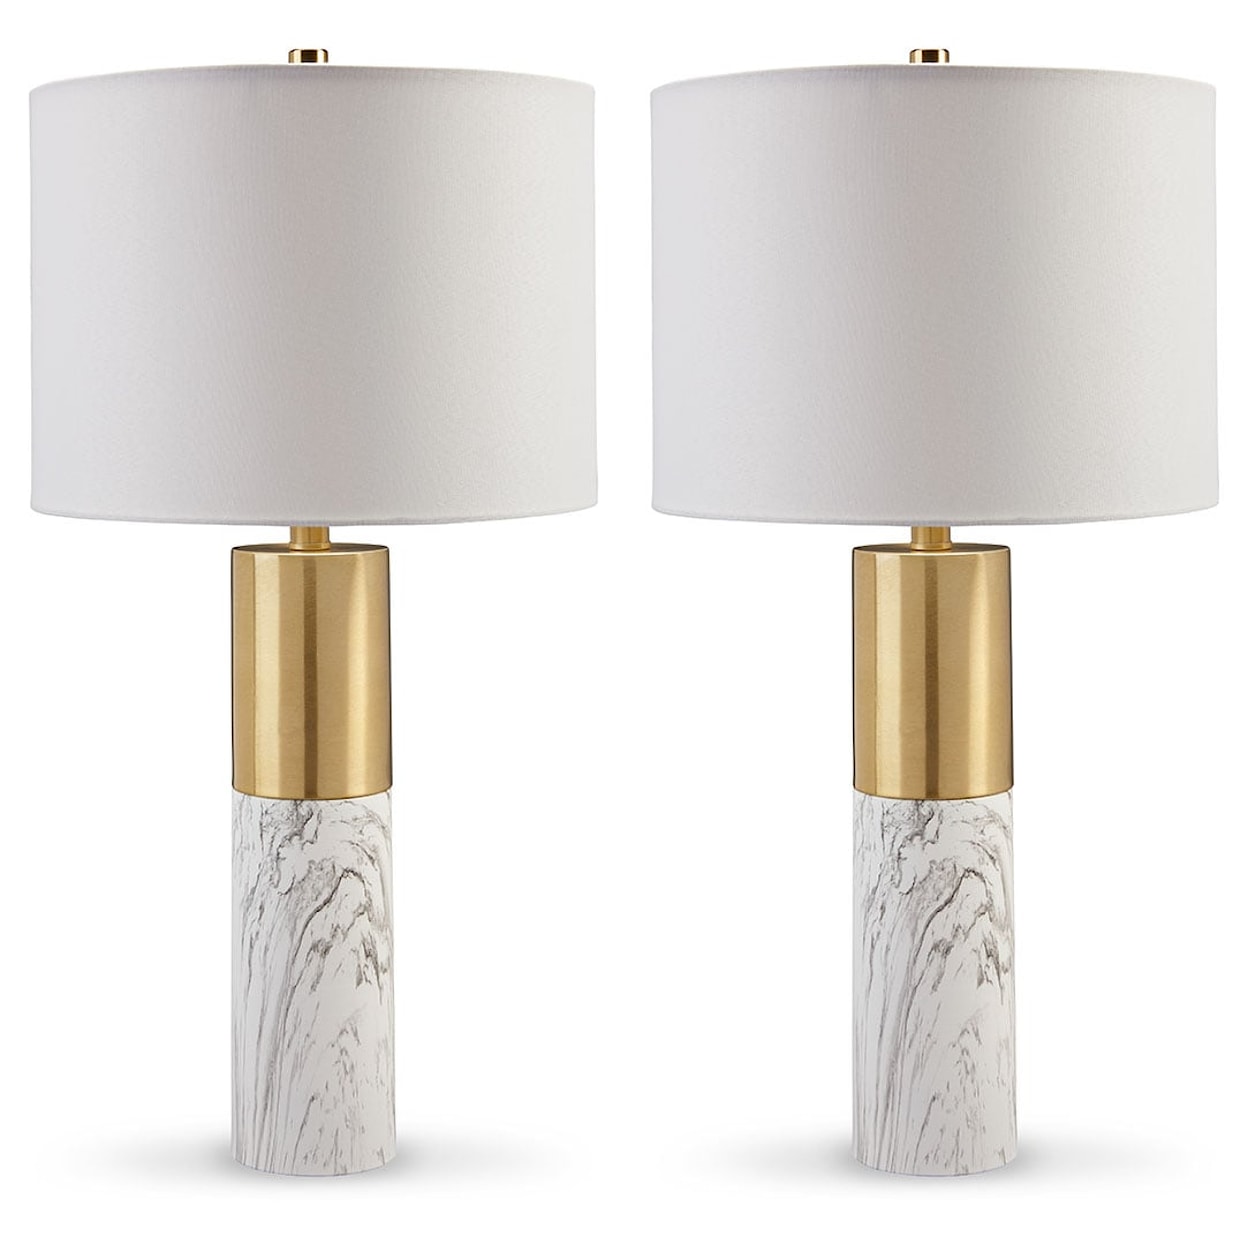 Benchcraft Lamps - Contemporary Samney Table Lamp (Set of 2)